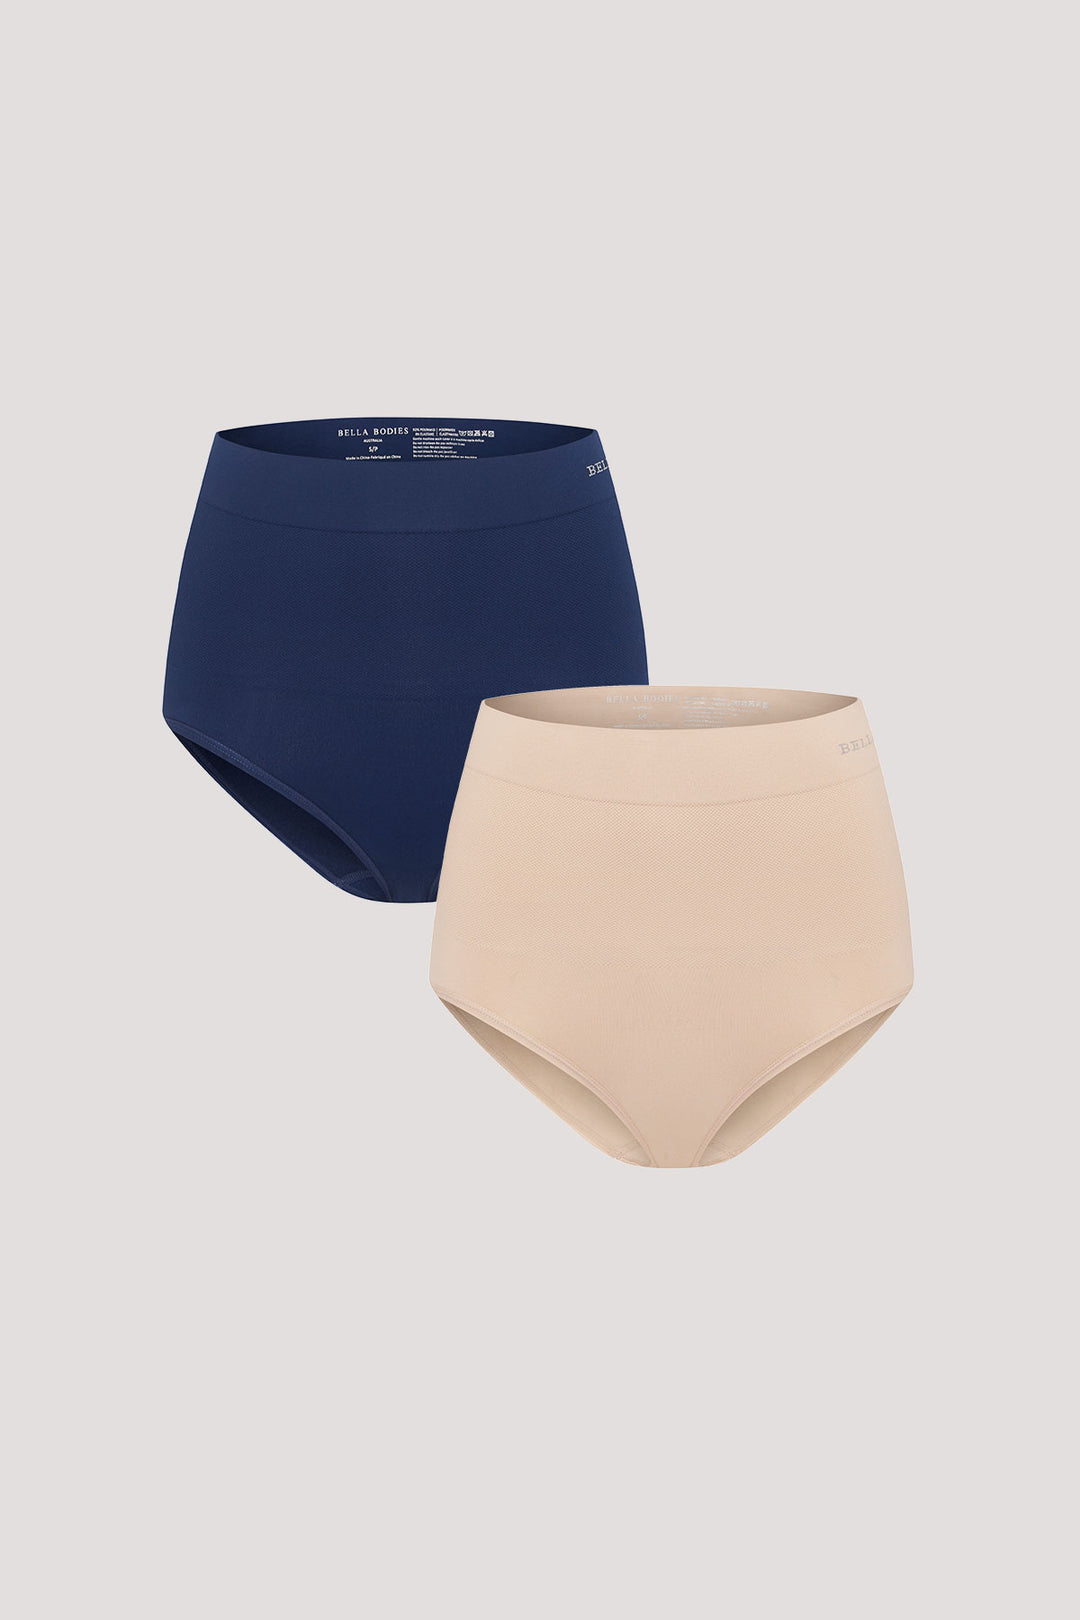 High Waist Smoothing and Firming, Full-Coverage Underwear 2 pack | Bella Bodies UK | Navy and Sand